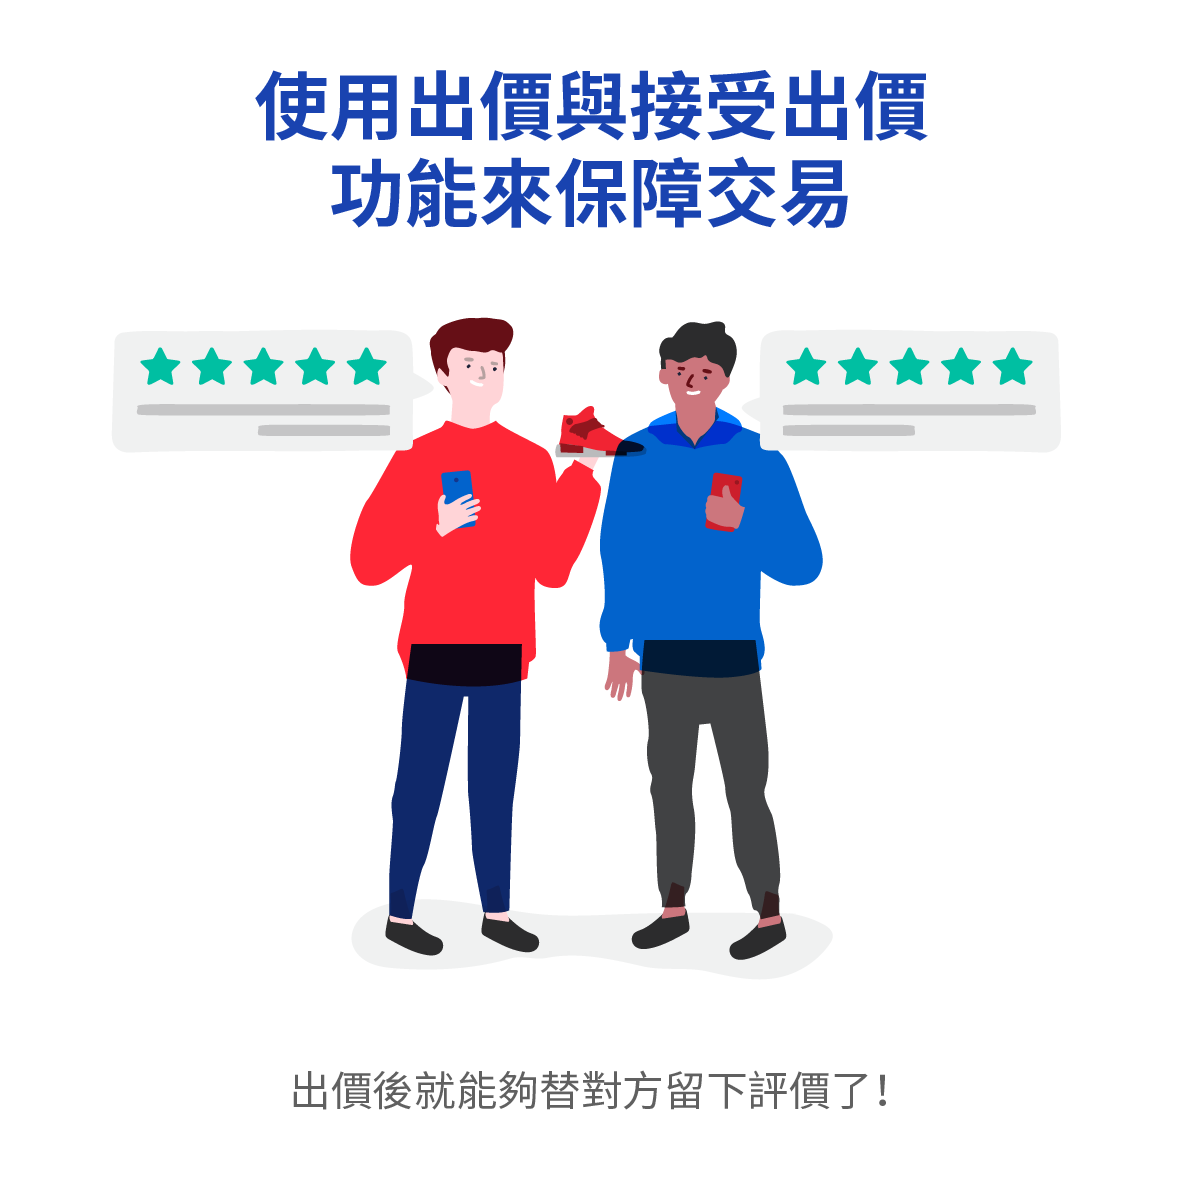 HelpCentre_How-to-deal-safely-on-Carousell_TW-3.png